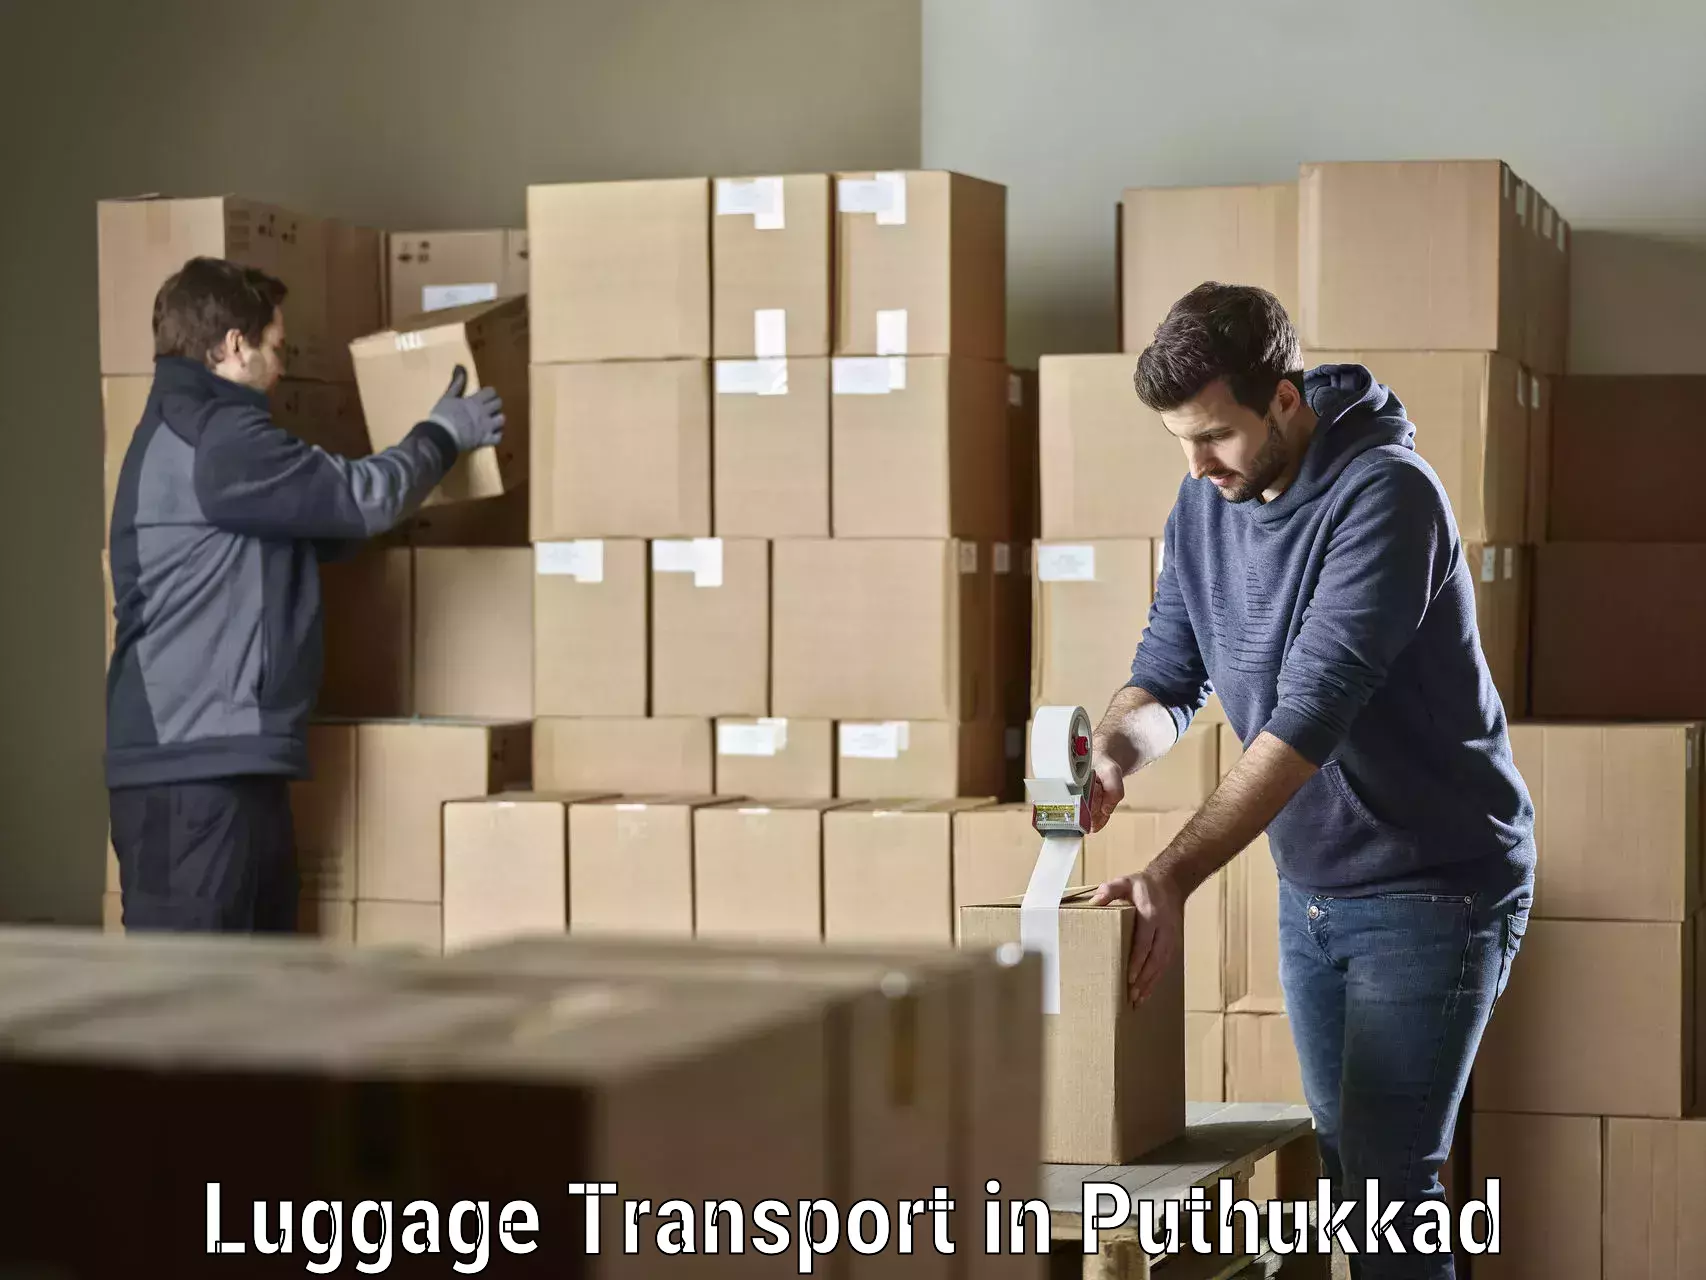 Baggage transport services in Puthukkad